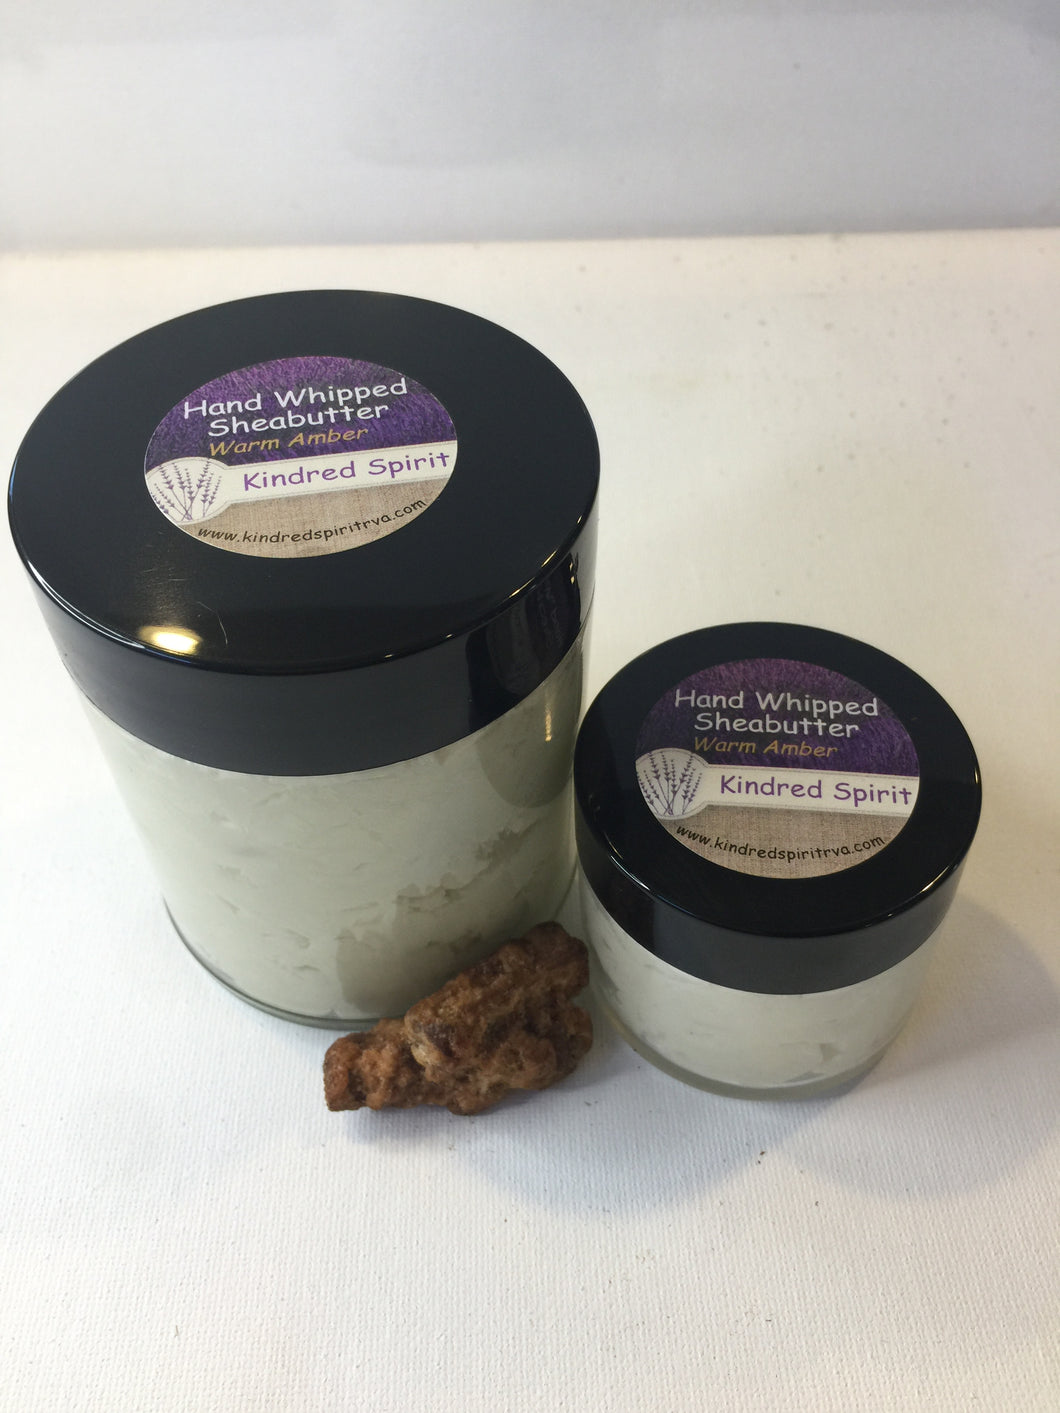 WARM AMBER, Hand Whipped Shea Butter